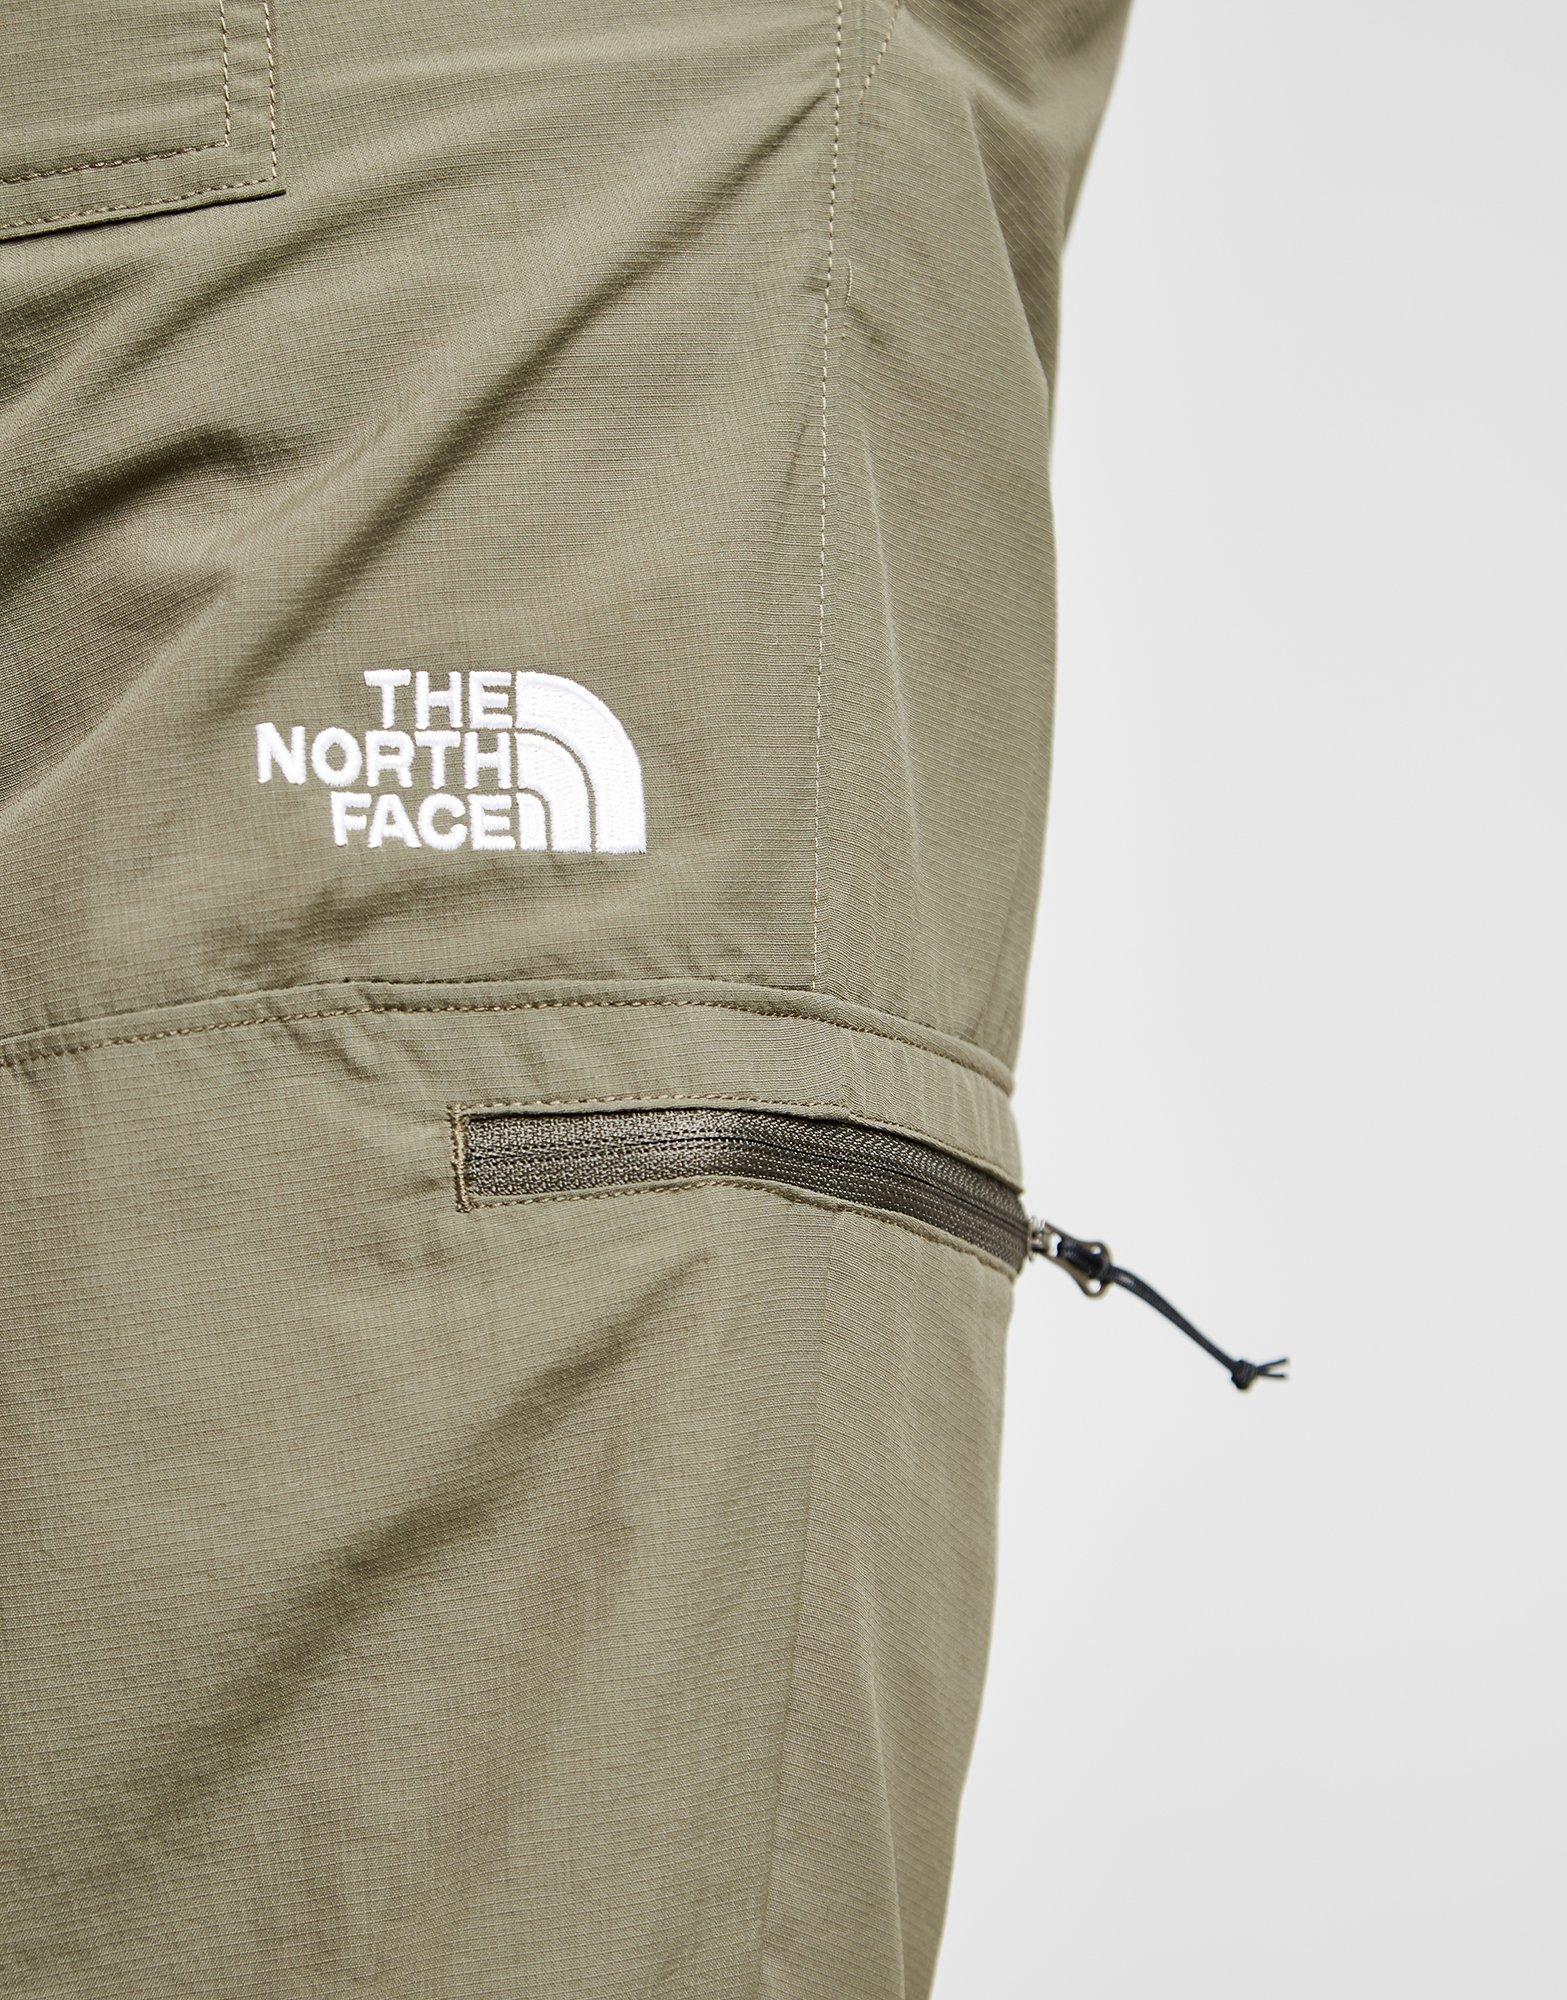 The North Face Synthetic Z-pocket Cargo Track Pants in Green for Men - Lyst